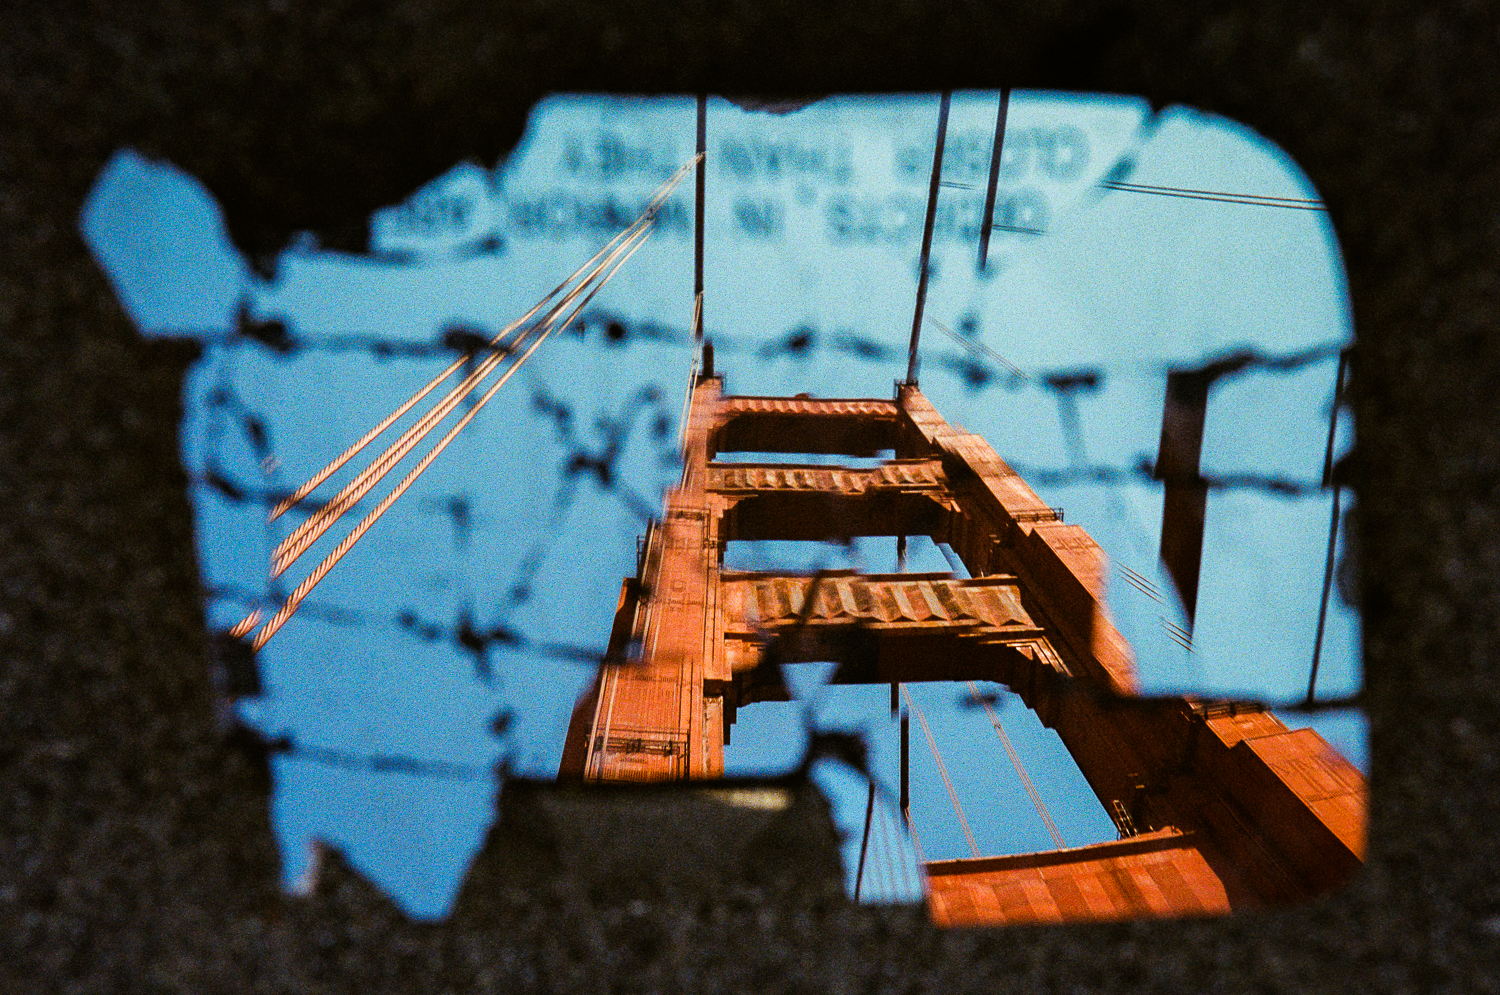 A reflection from the broken remains of a car's side mirror shows the Golden Gate Bridge's south tower in October 2020.